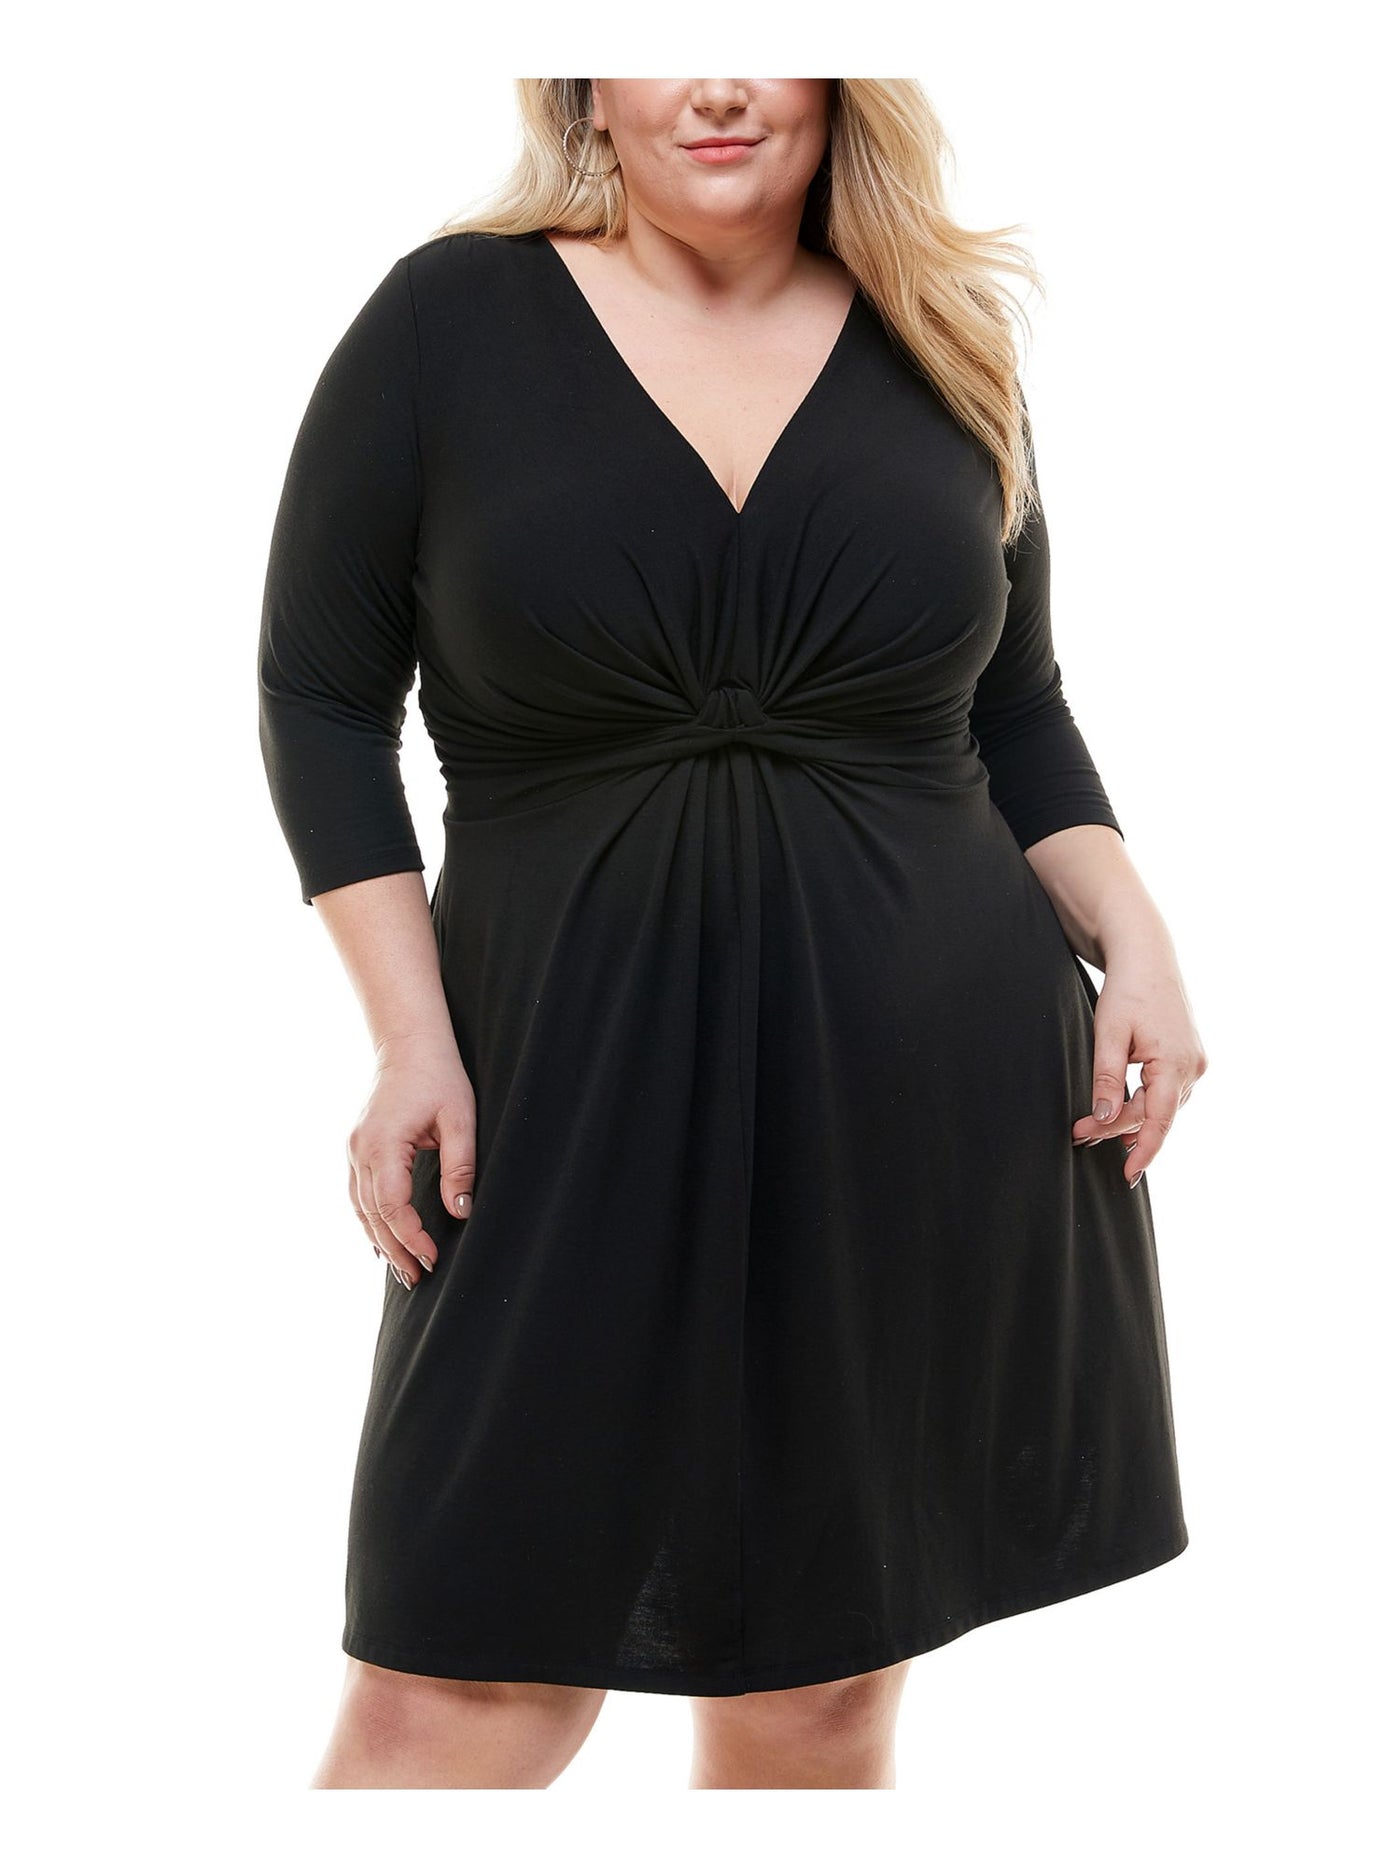 KINGSTON GREY Womens Black 3/4 Sleeve V Neck Above The Knee Party Fit + Flare Dress Plus 1X